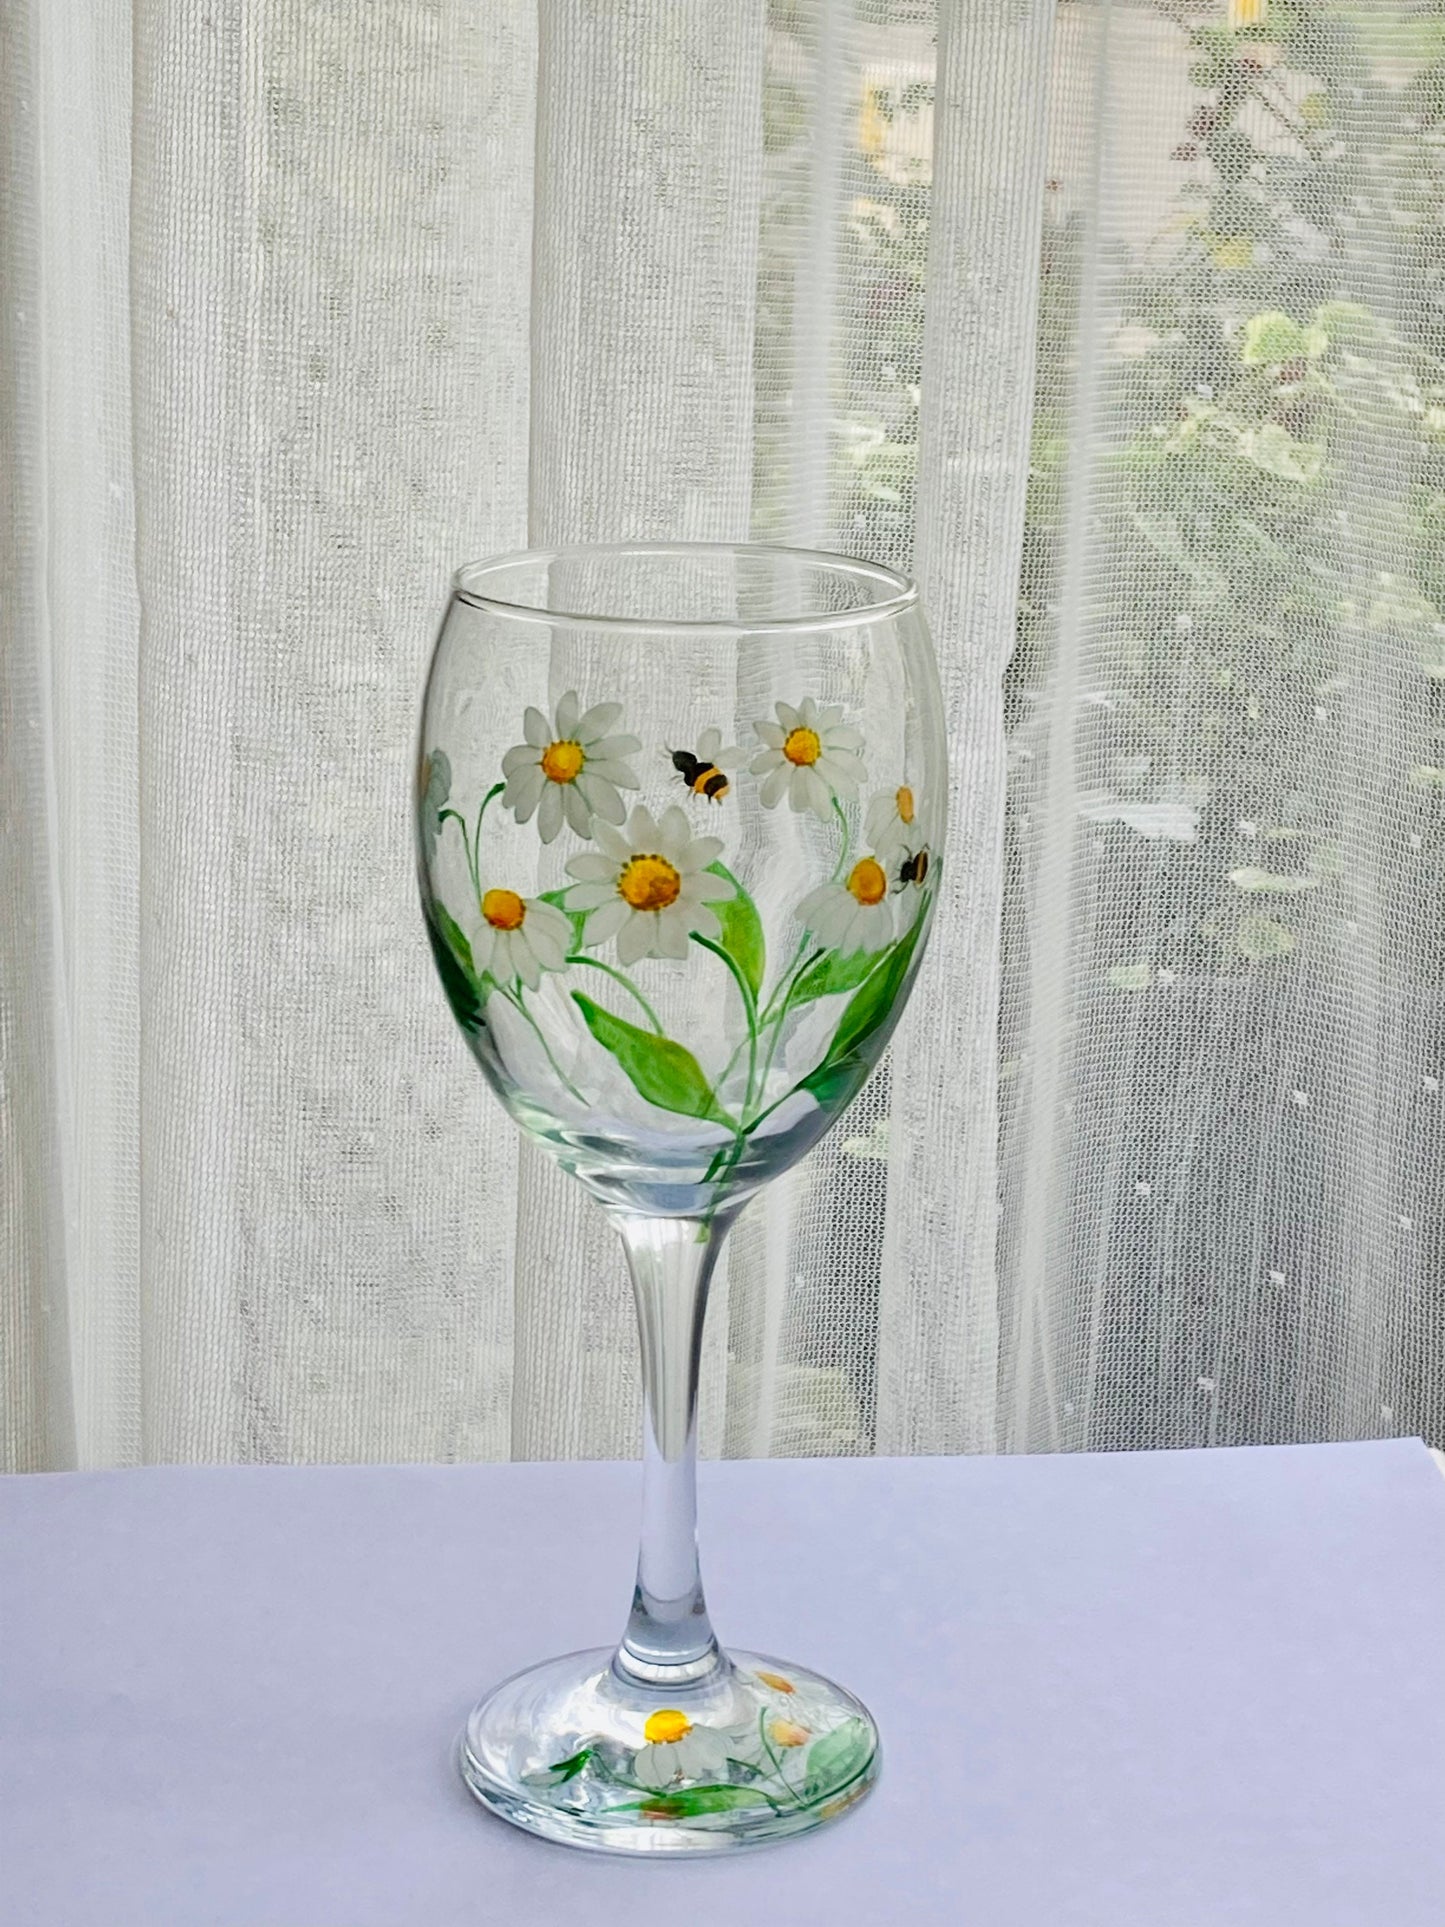 Daisy and bees design wine glass